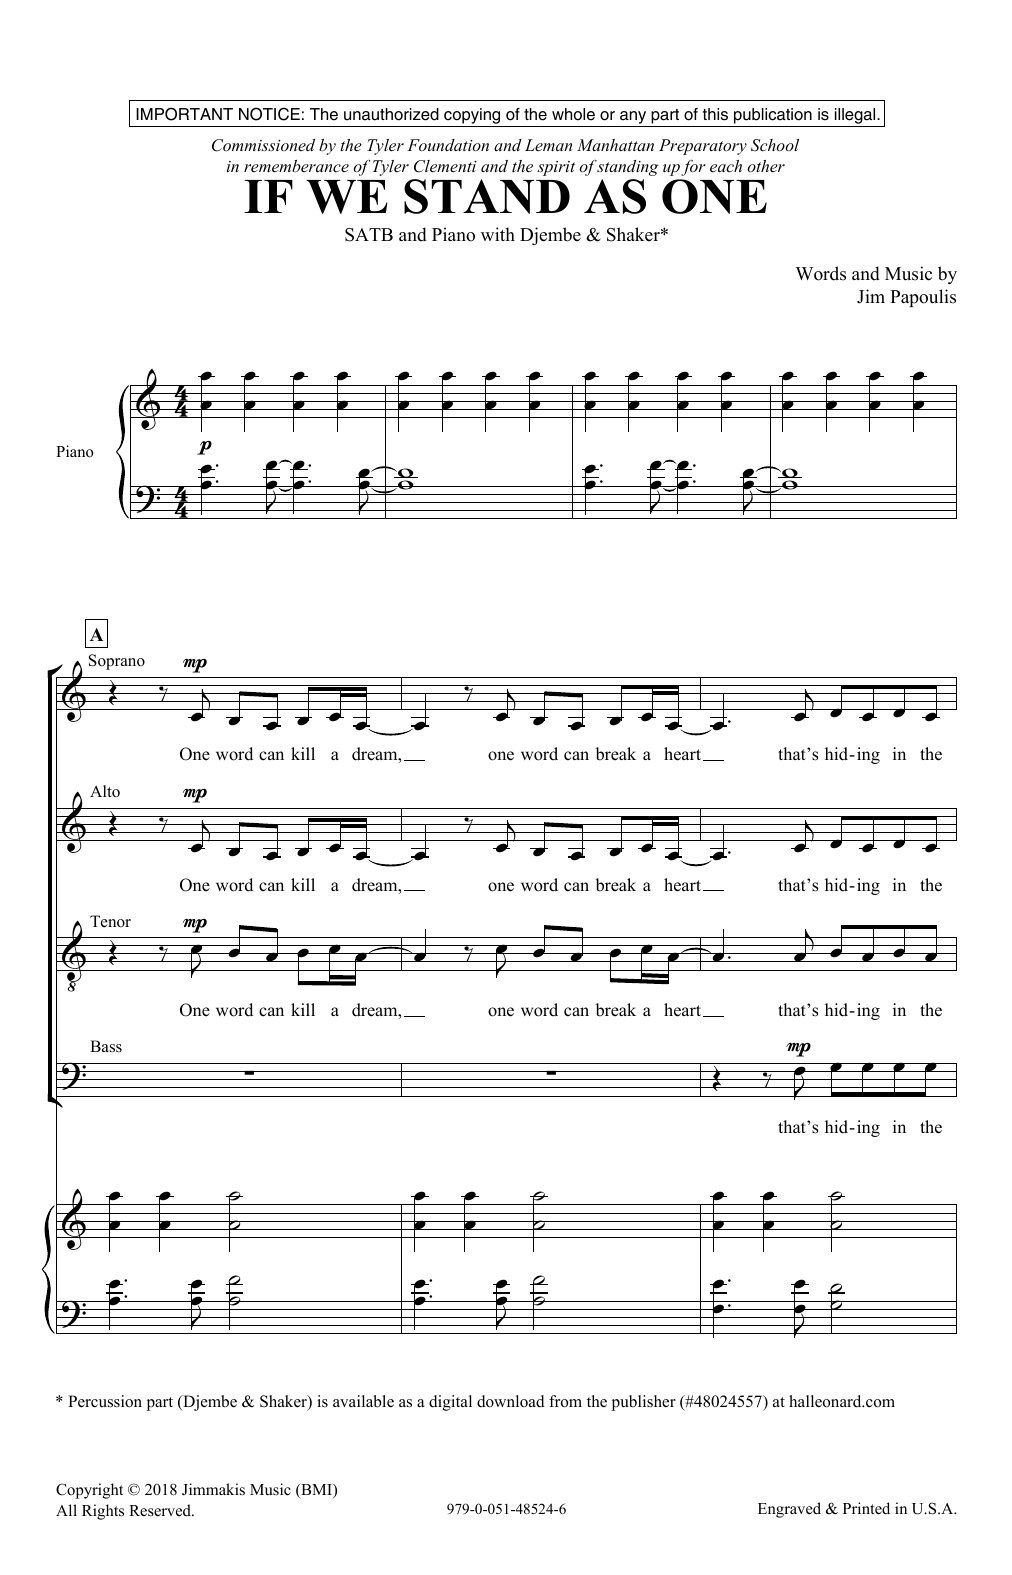 Download Jim Papoulis If We Stand As One Sheet Music